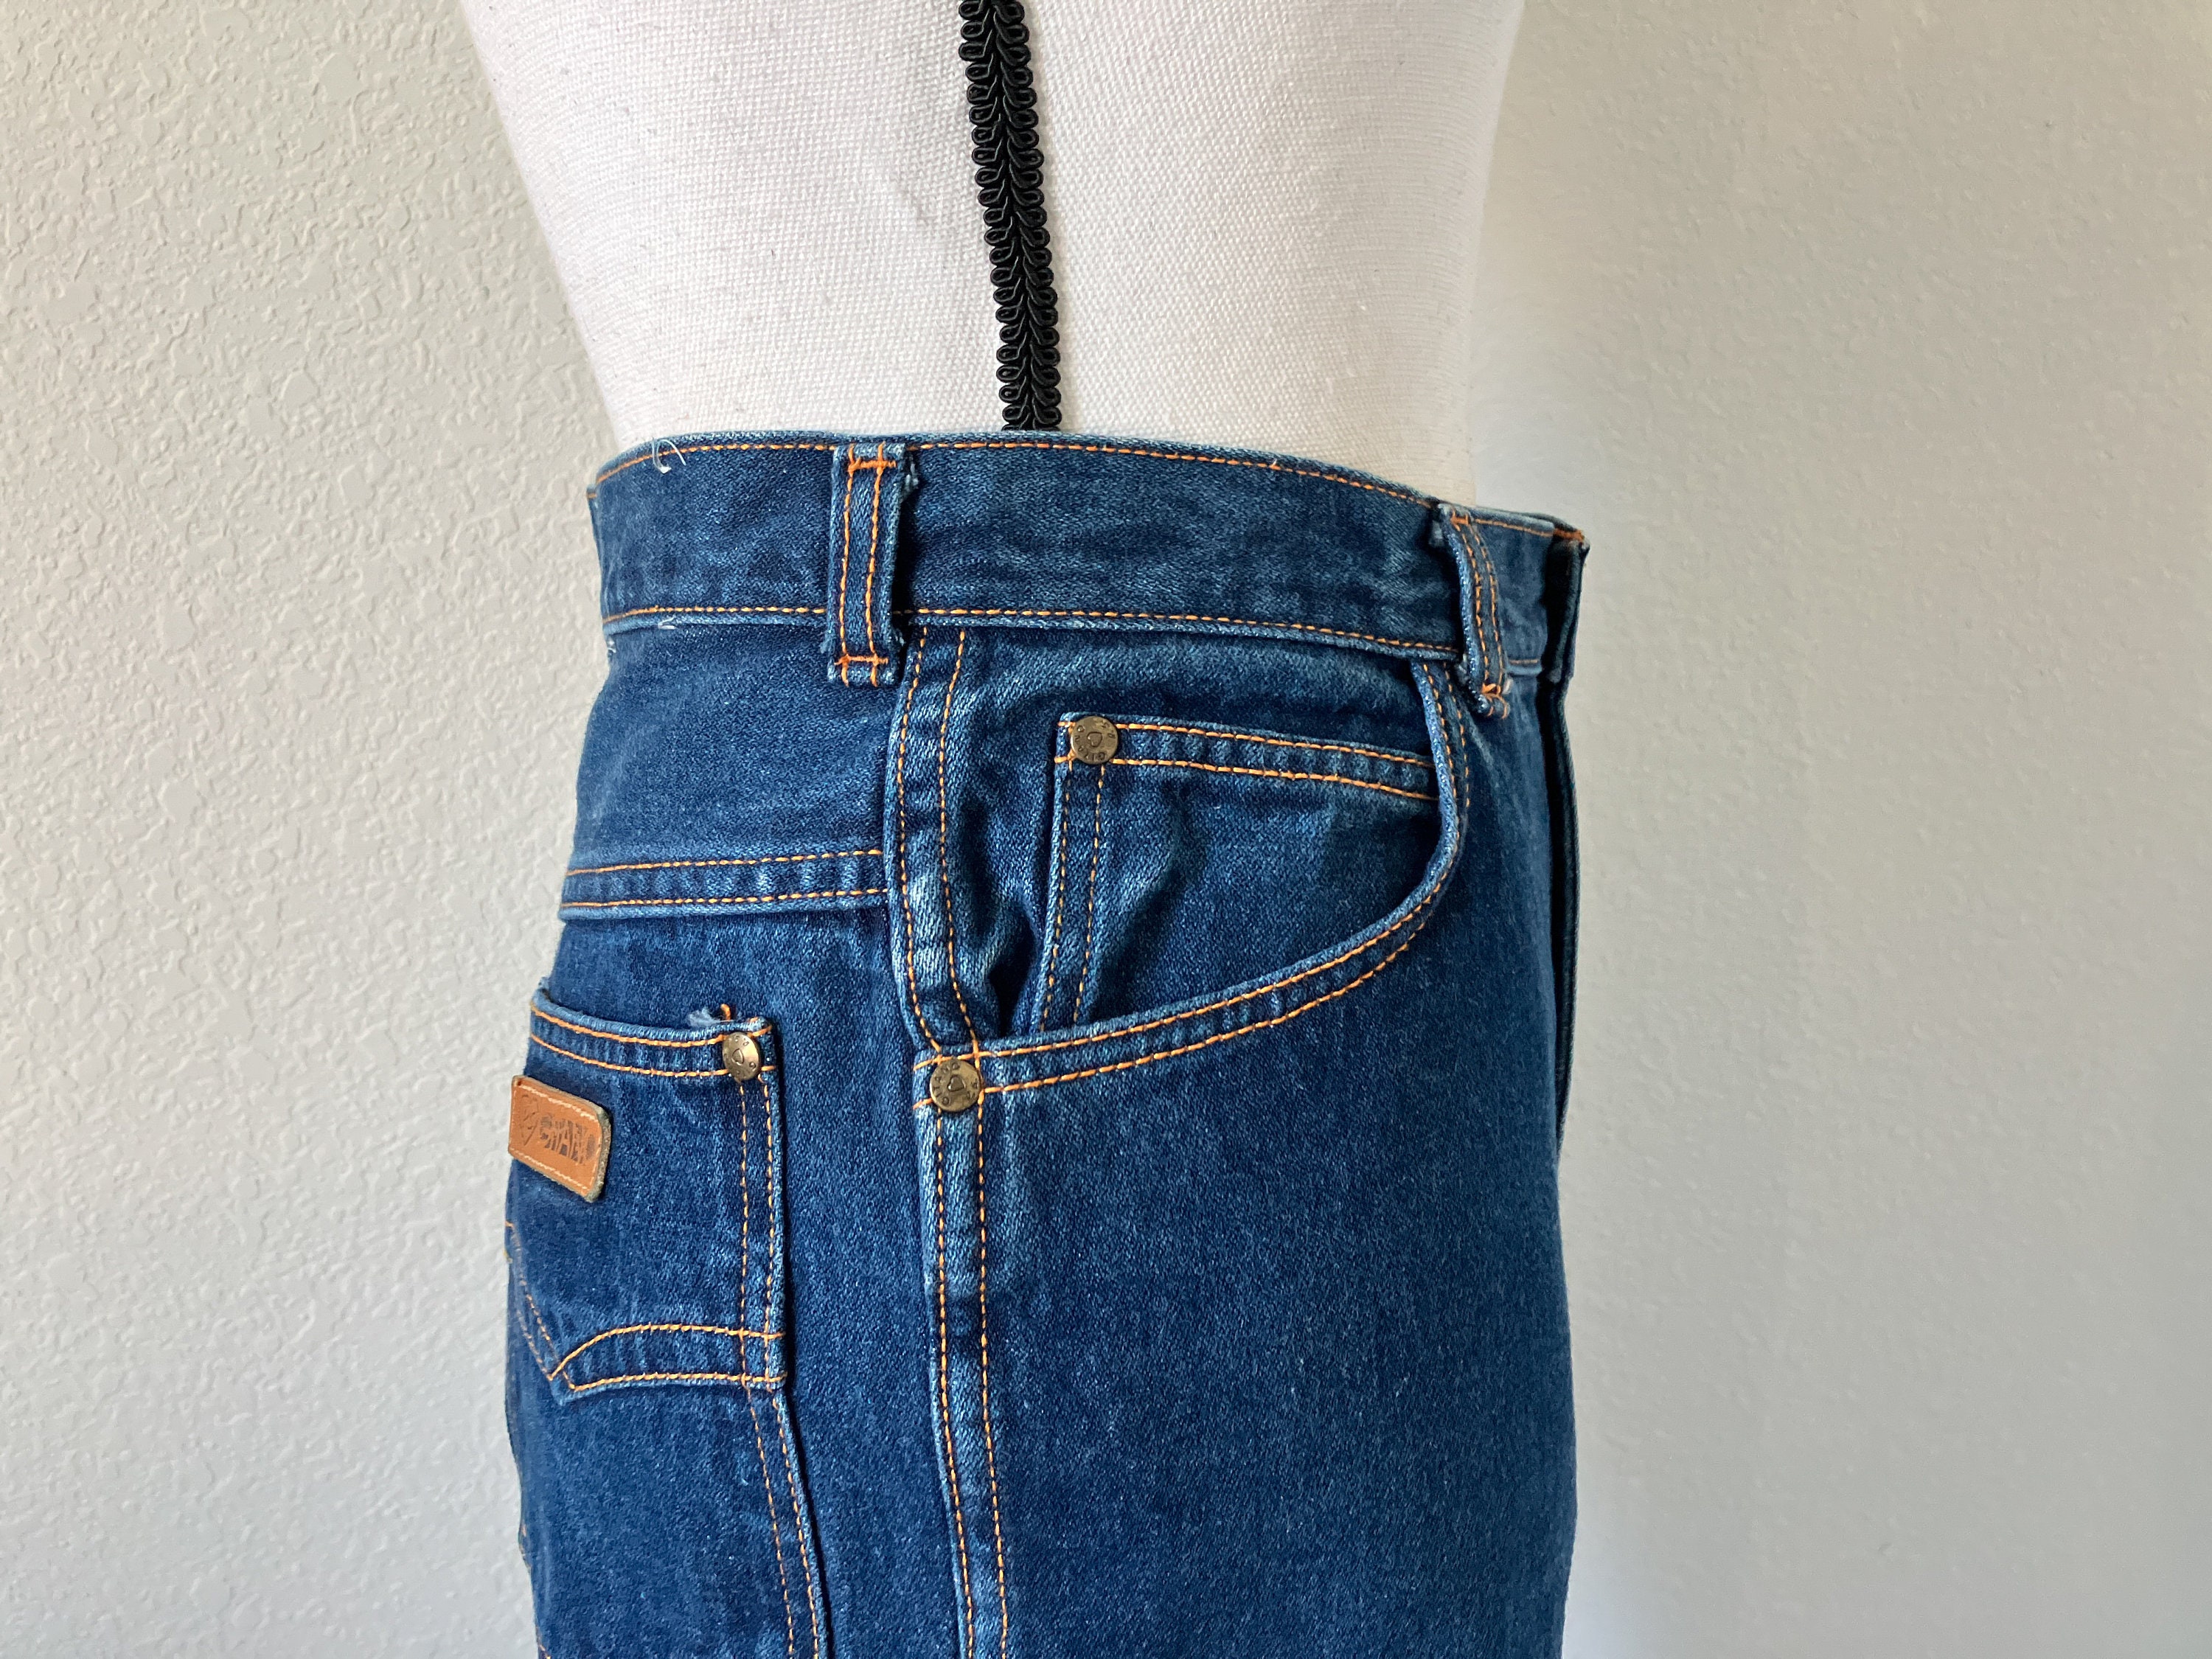 1980s High Waisted Jeans, Vintage Dark Wash Mom Jeans - Etsy